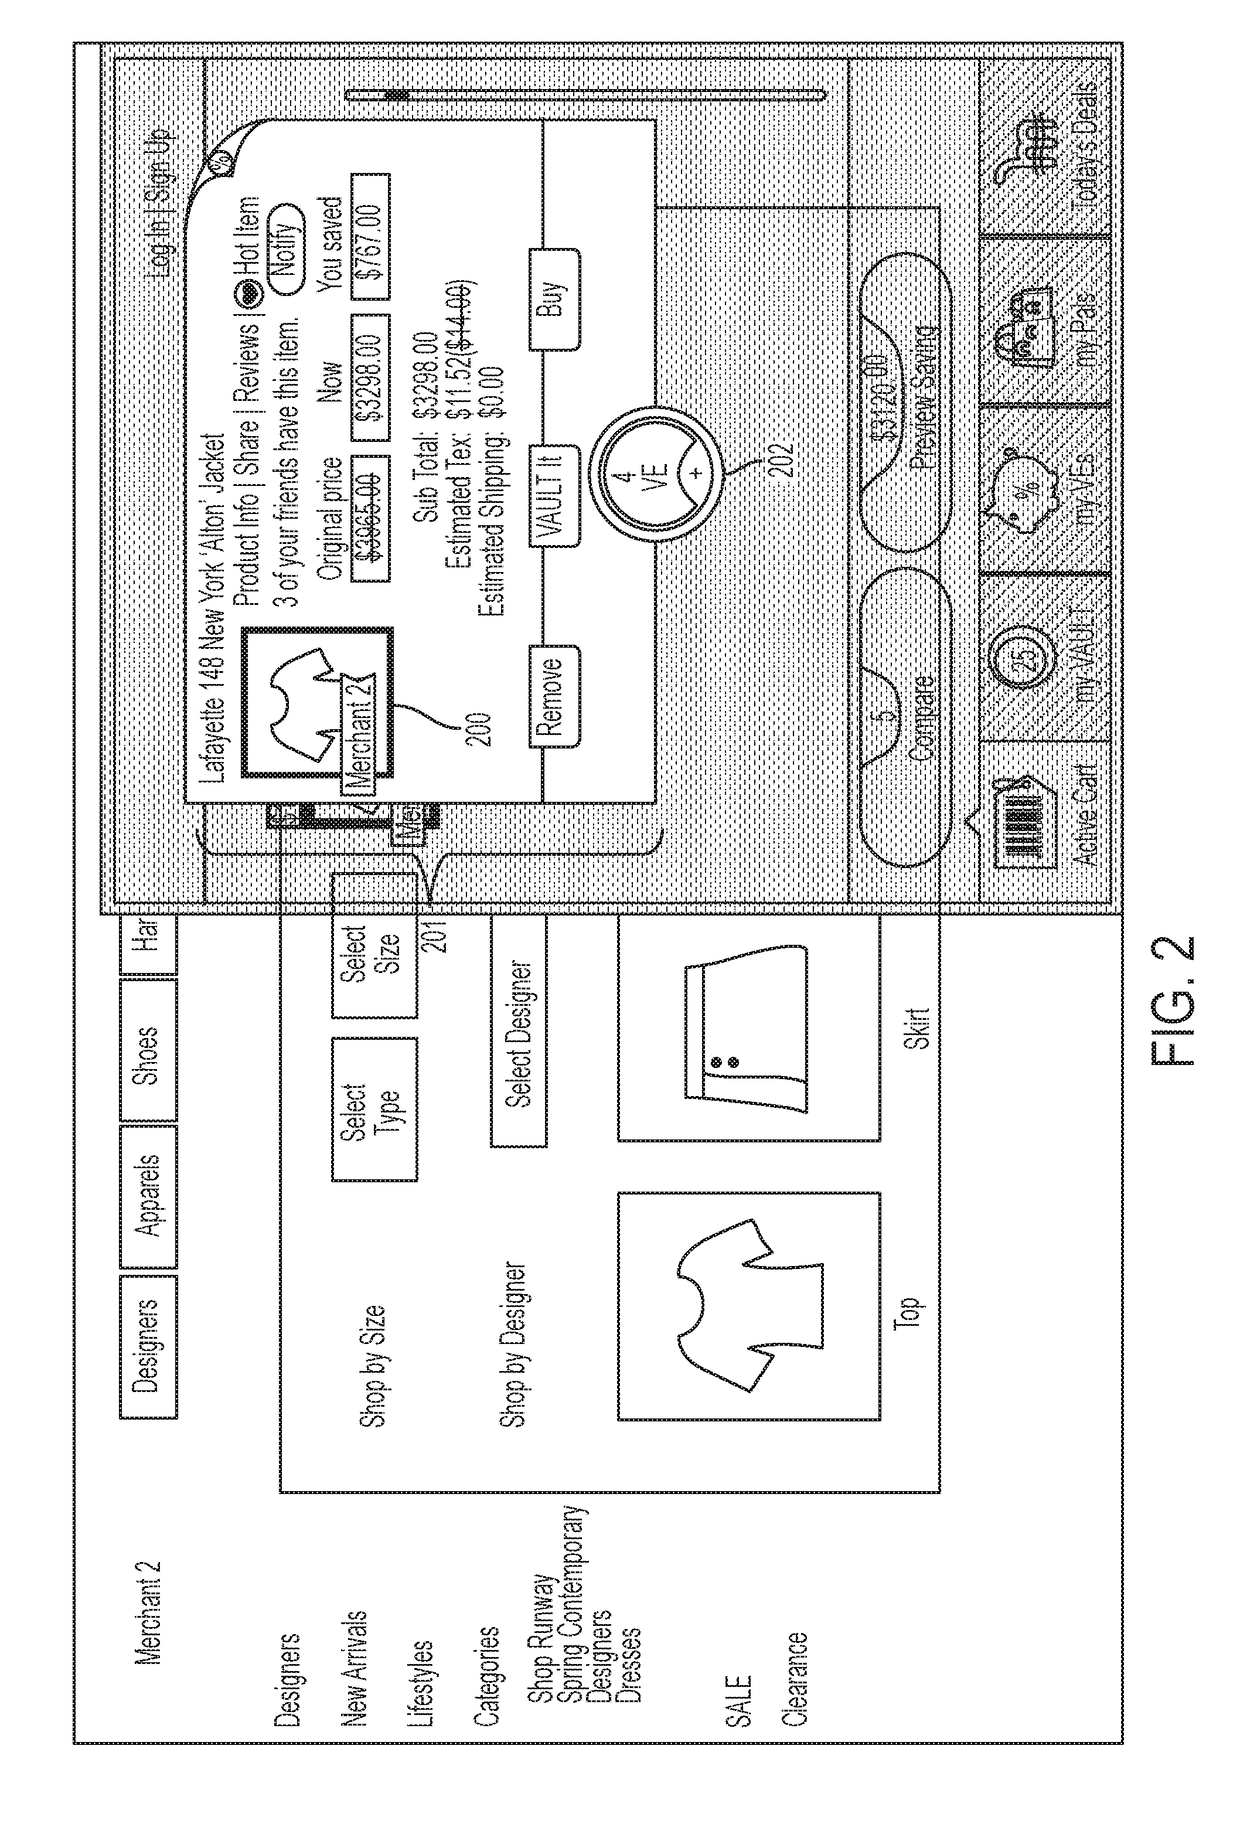 System and method for consumer management purchasing and account information